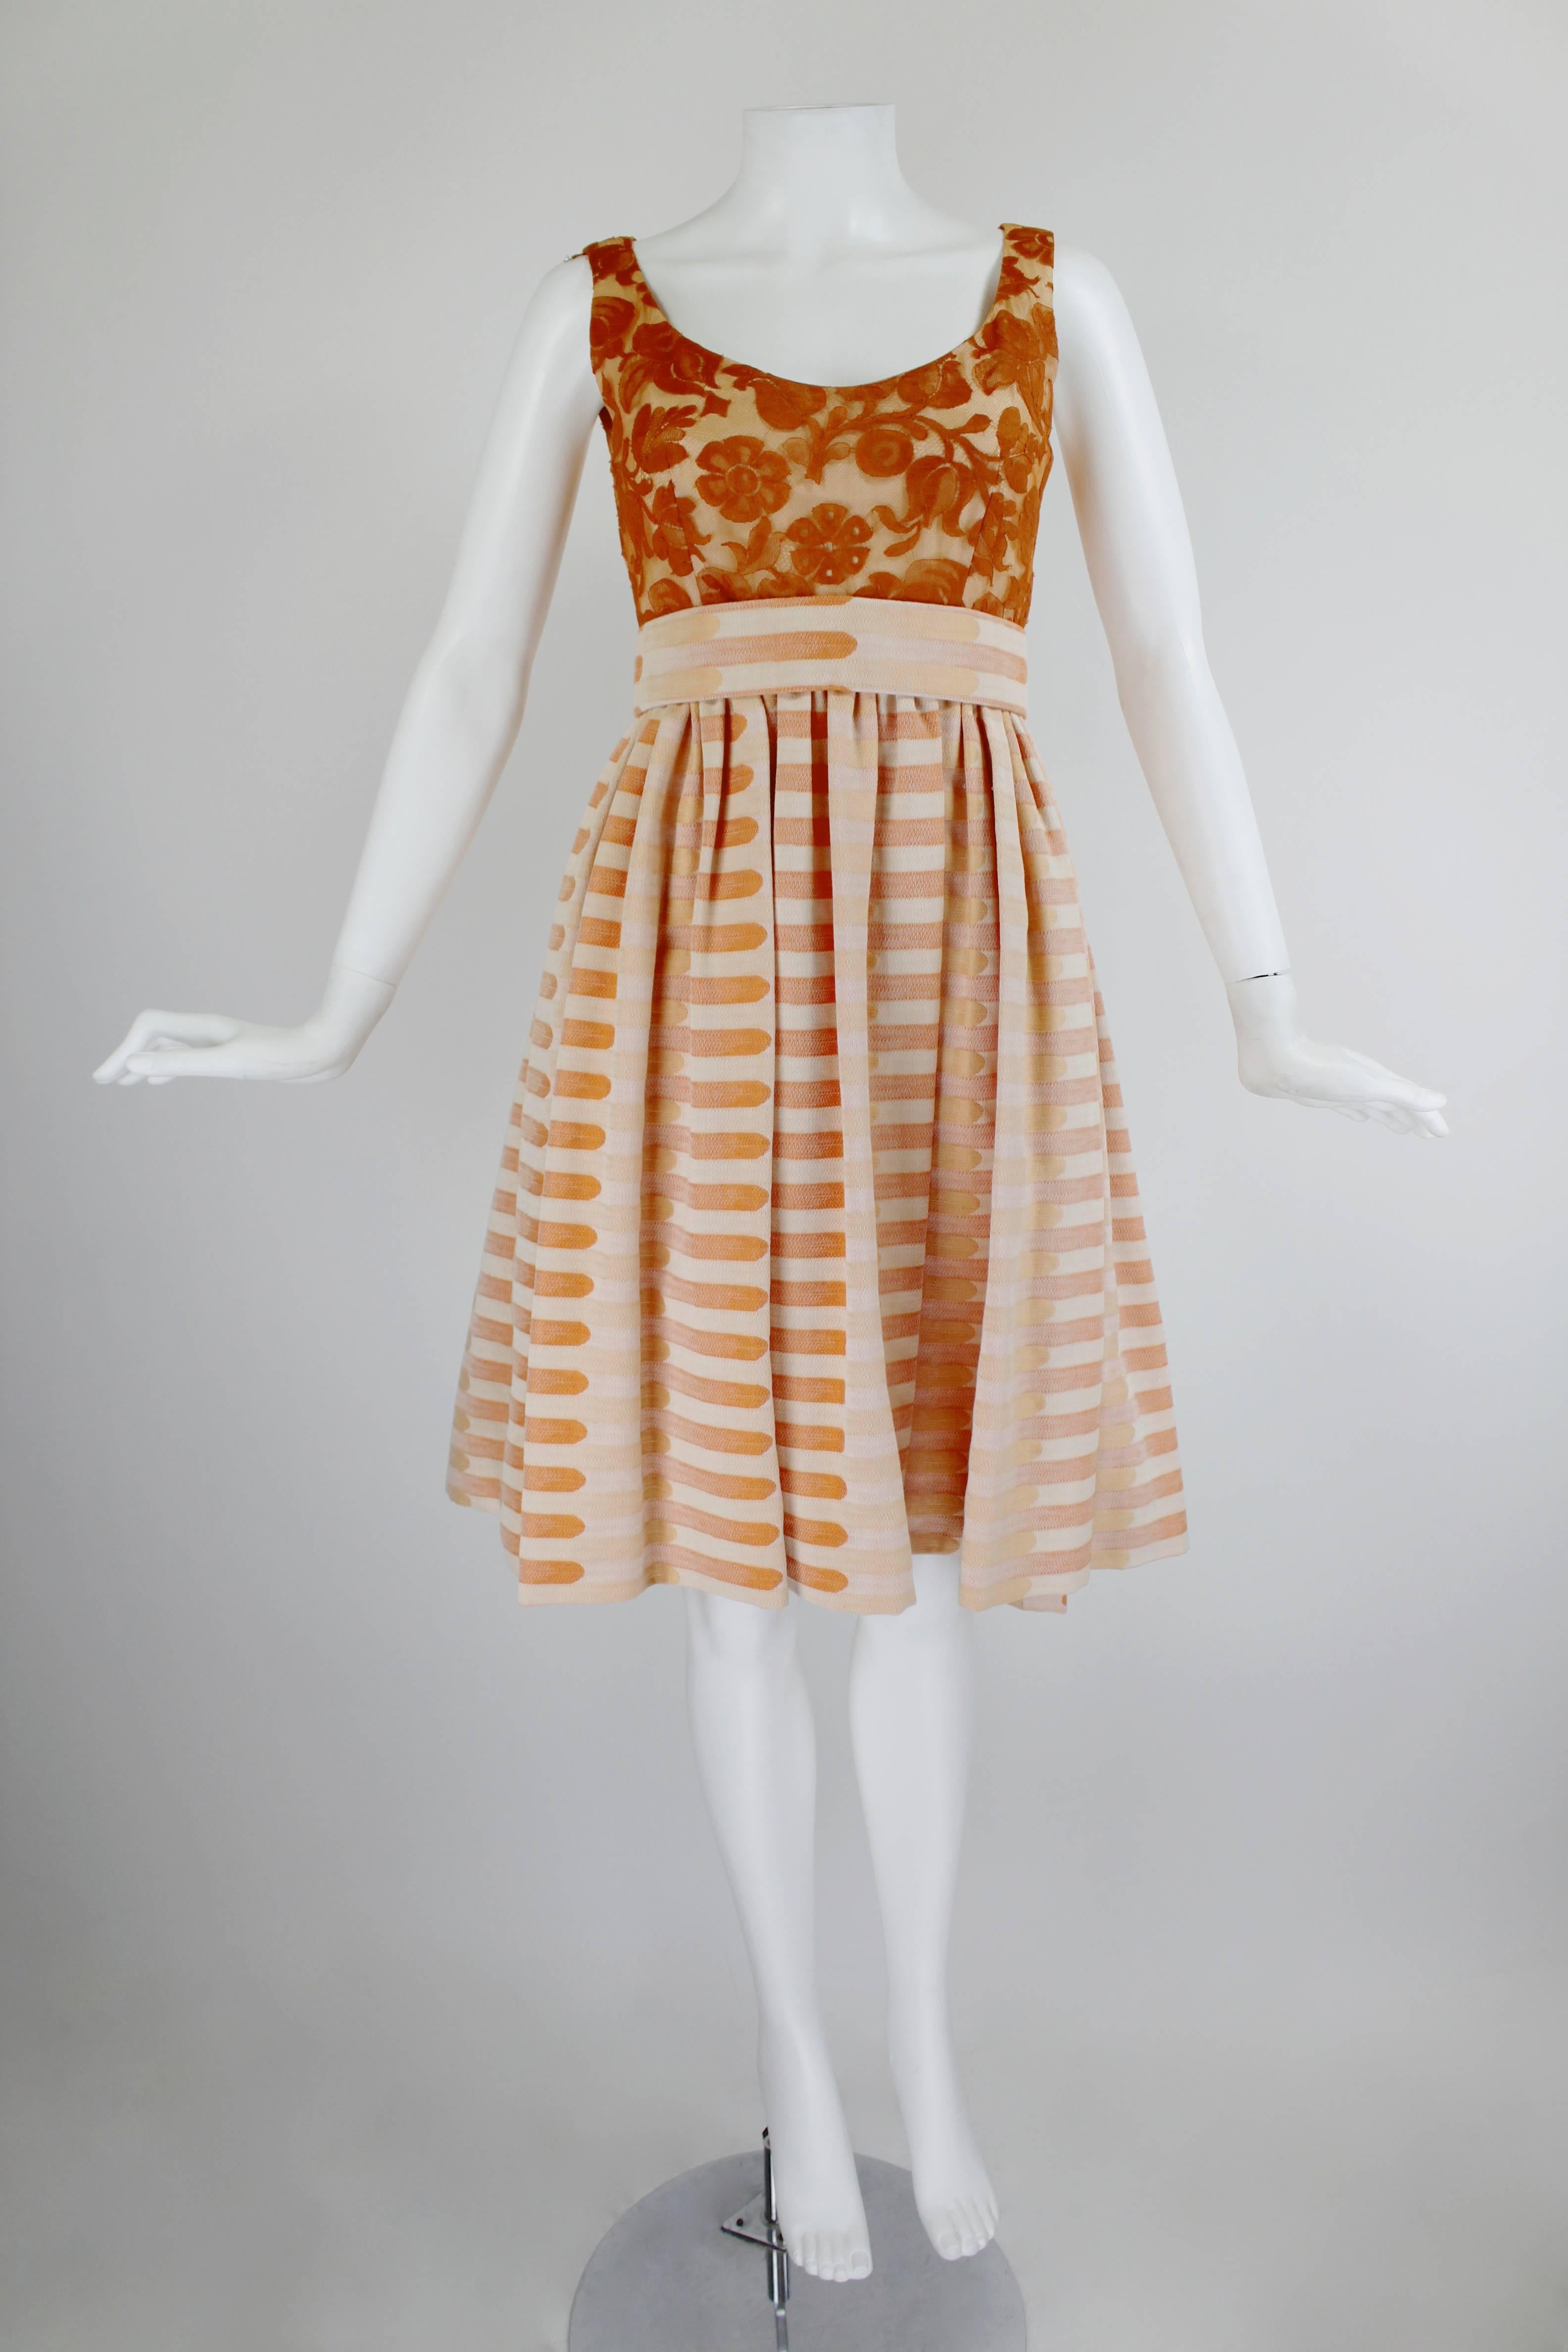 The skirt of this fabulous Amey ensemble is done in the most beautiful peach and tangerine colors, woven in a graphic horizontal print. Pumpkin orange lace covers the bodice, and the dress has a matching lace jacket with pearl pumpkin